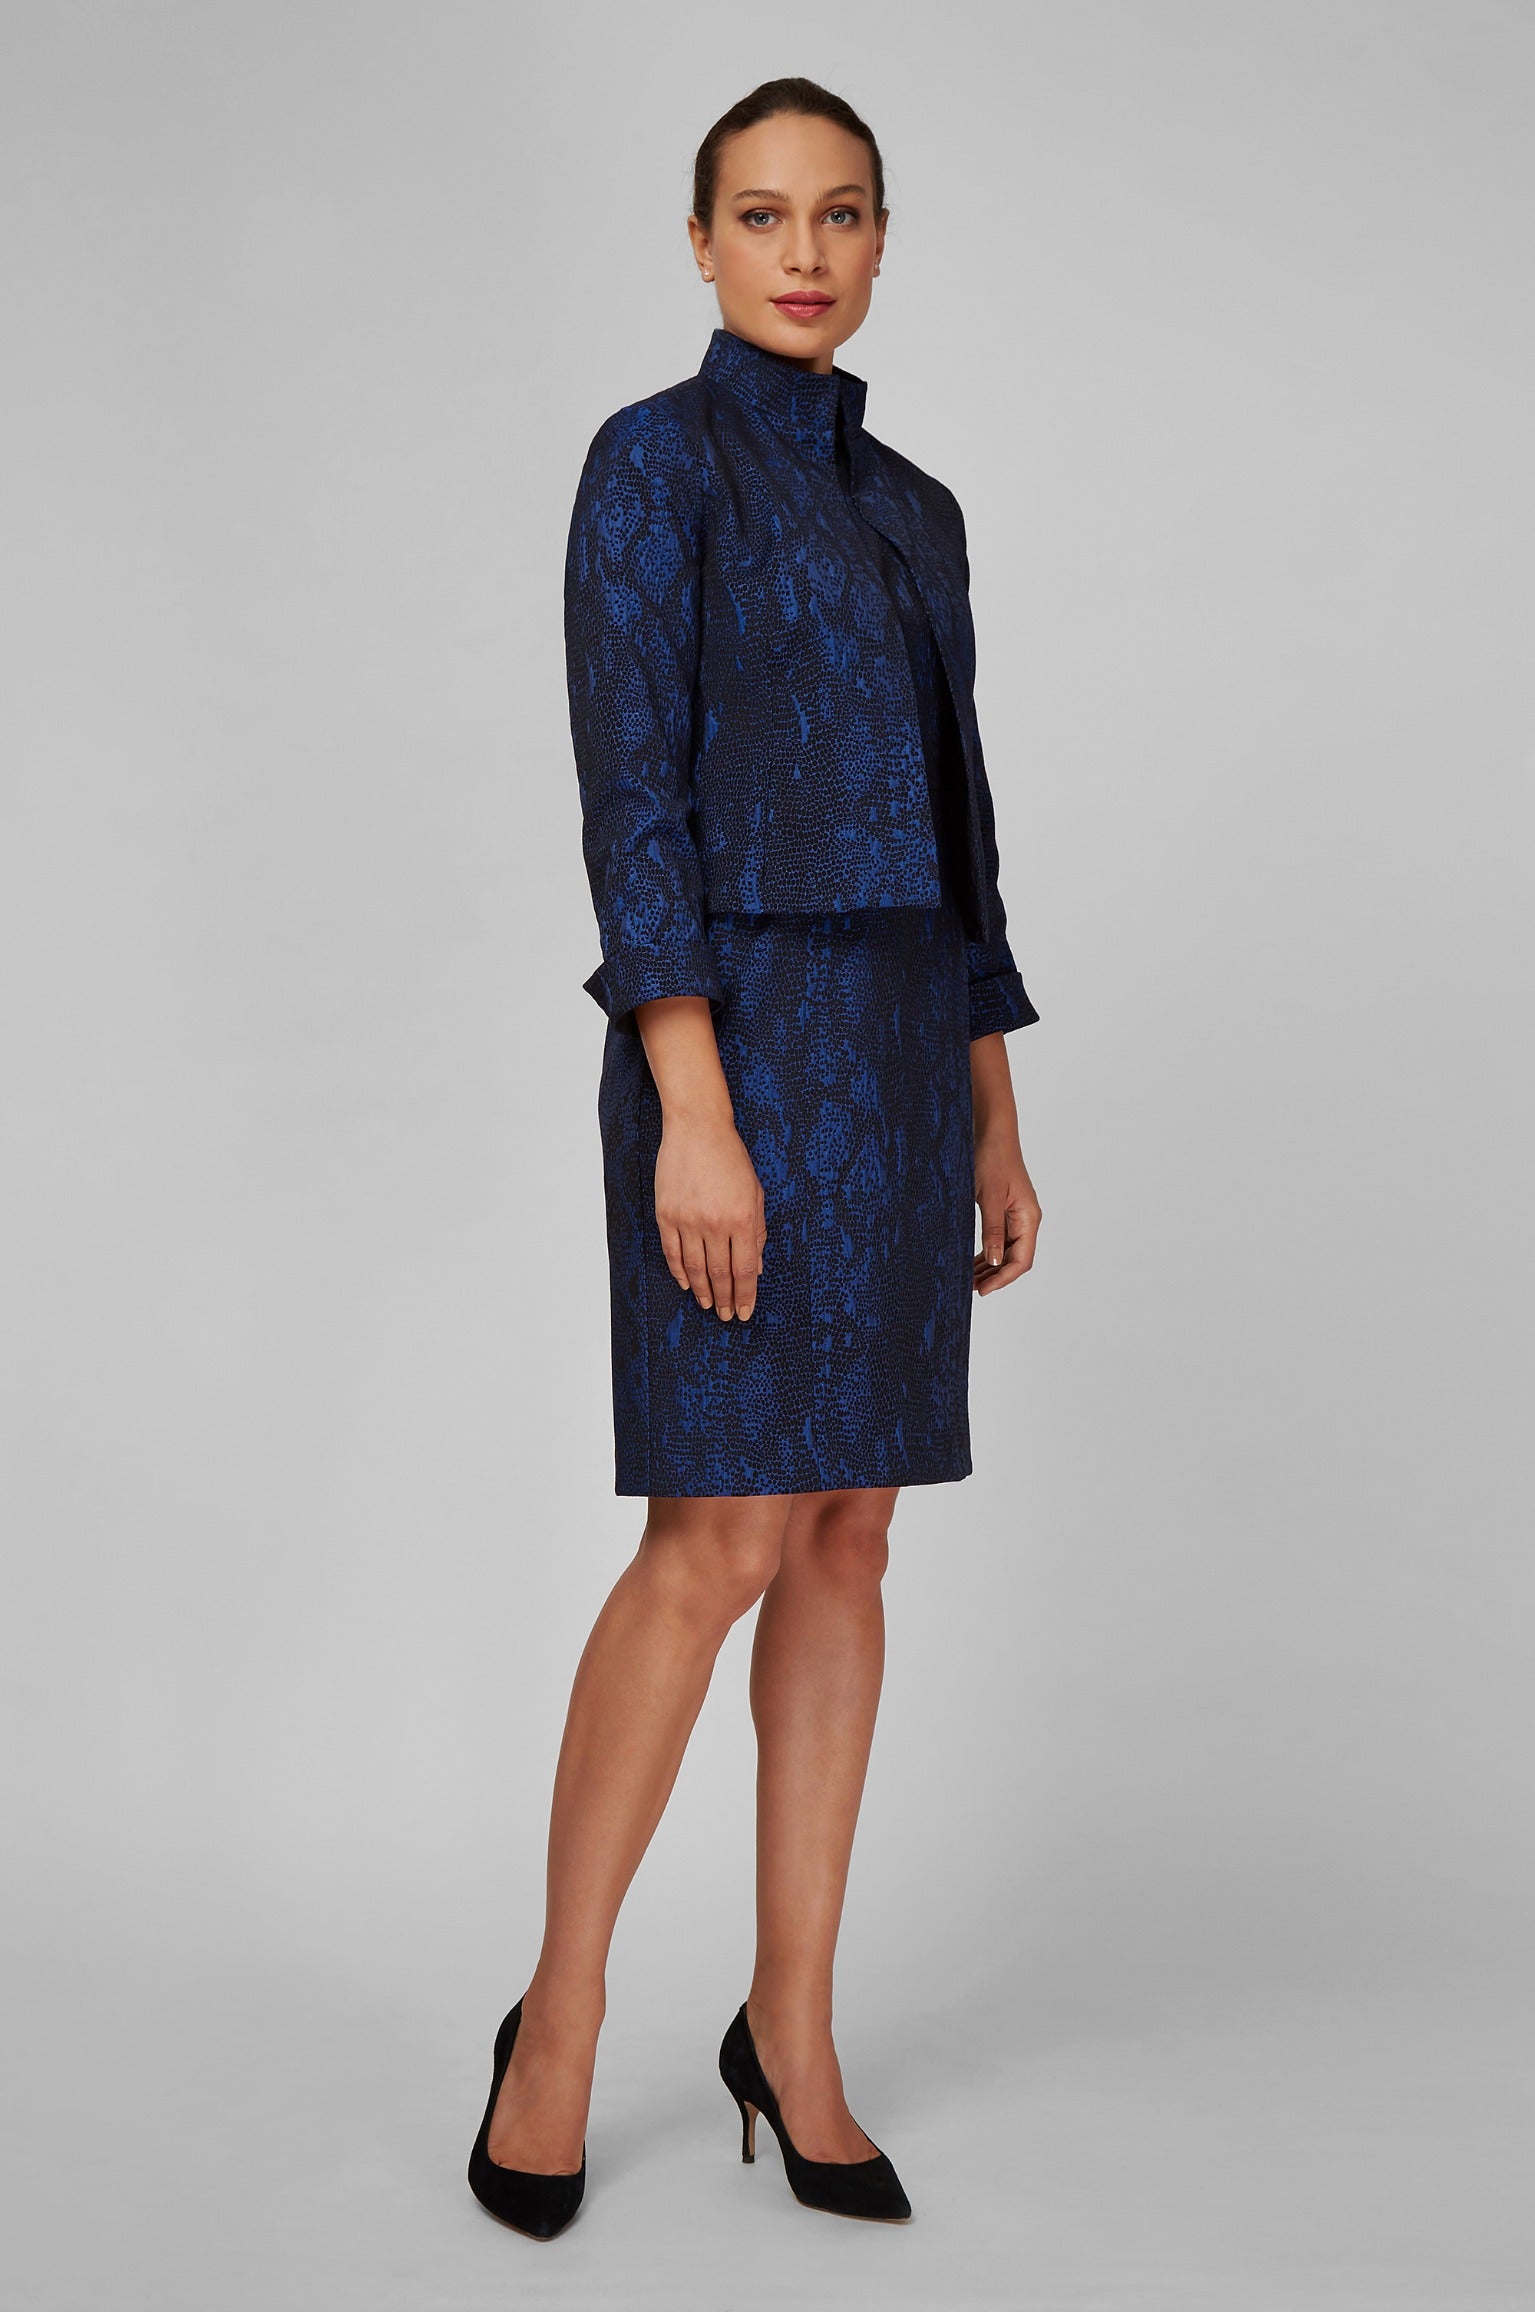 Women' Business Luna Dress - Blue Viper Jacquard NORA GARDNER | OFFICIAL STORE for work and office